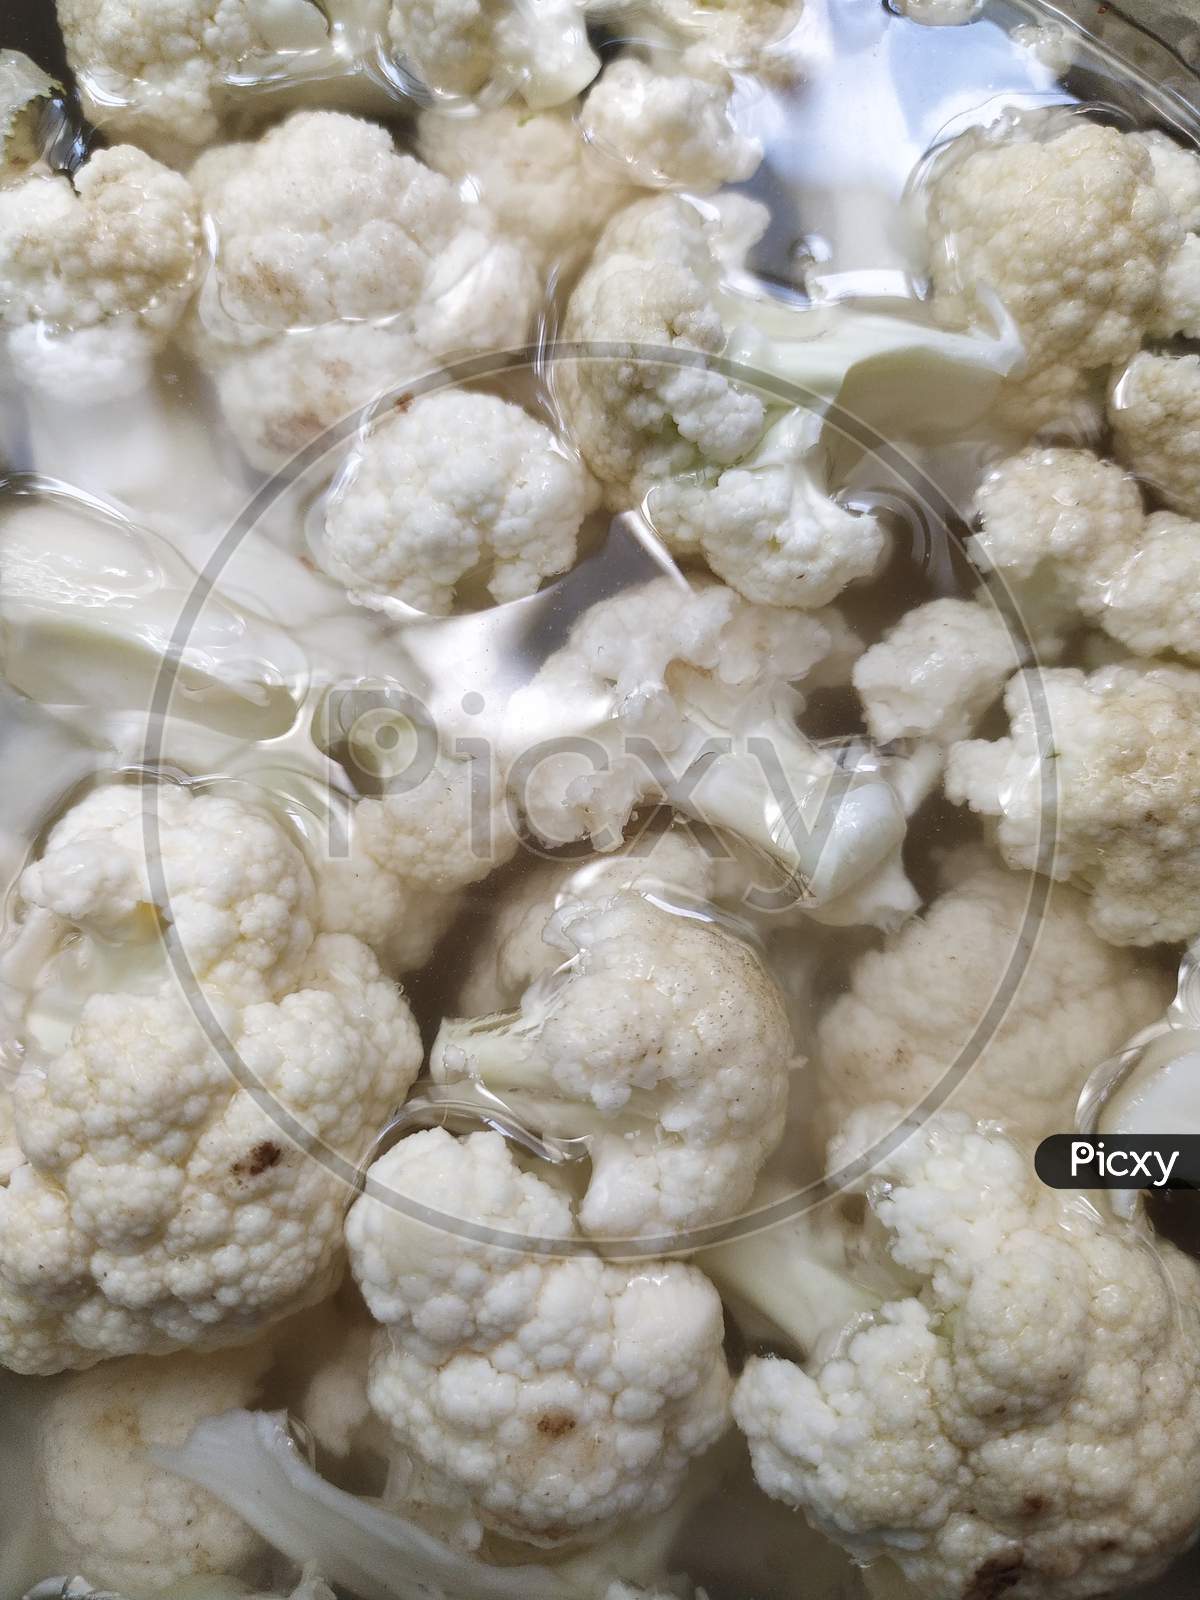 Closeup View Of Chopped And Rinsed White Cauliflower , Scene Captured From Top